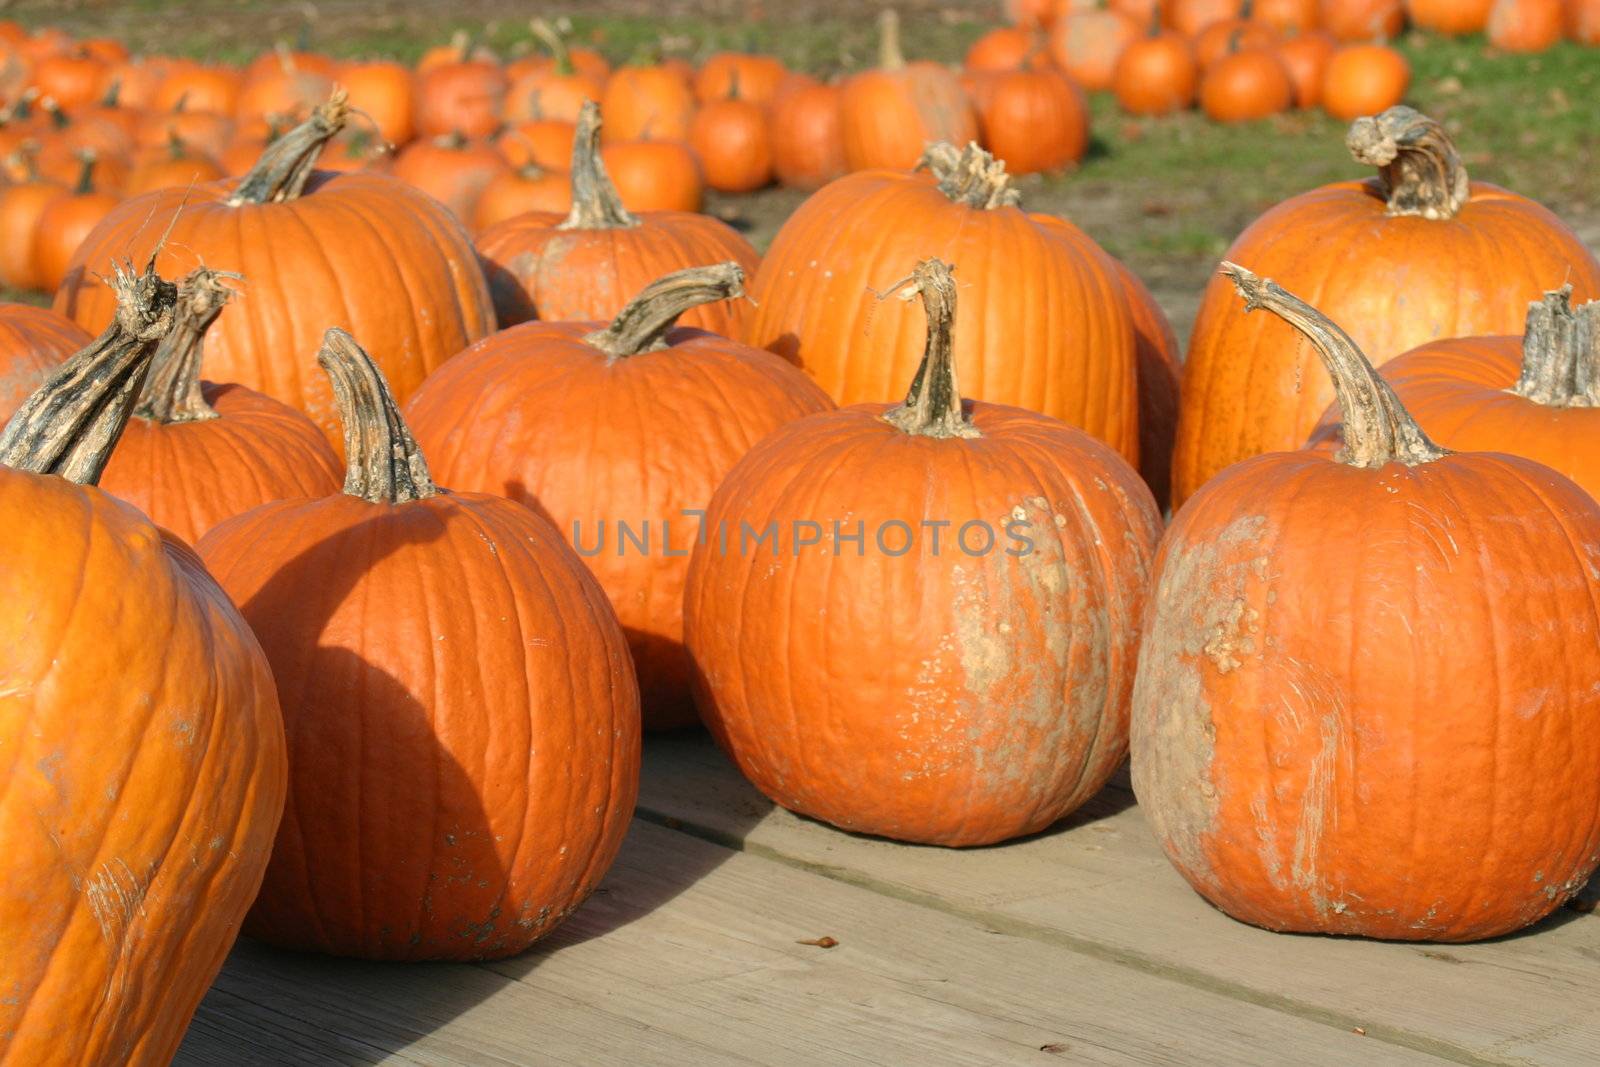 These are pumpkins for sale at a farm market.